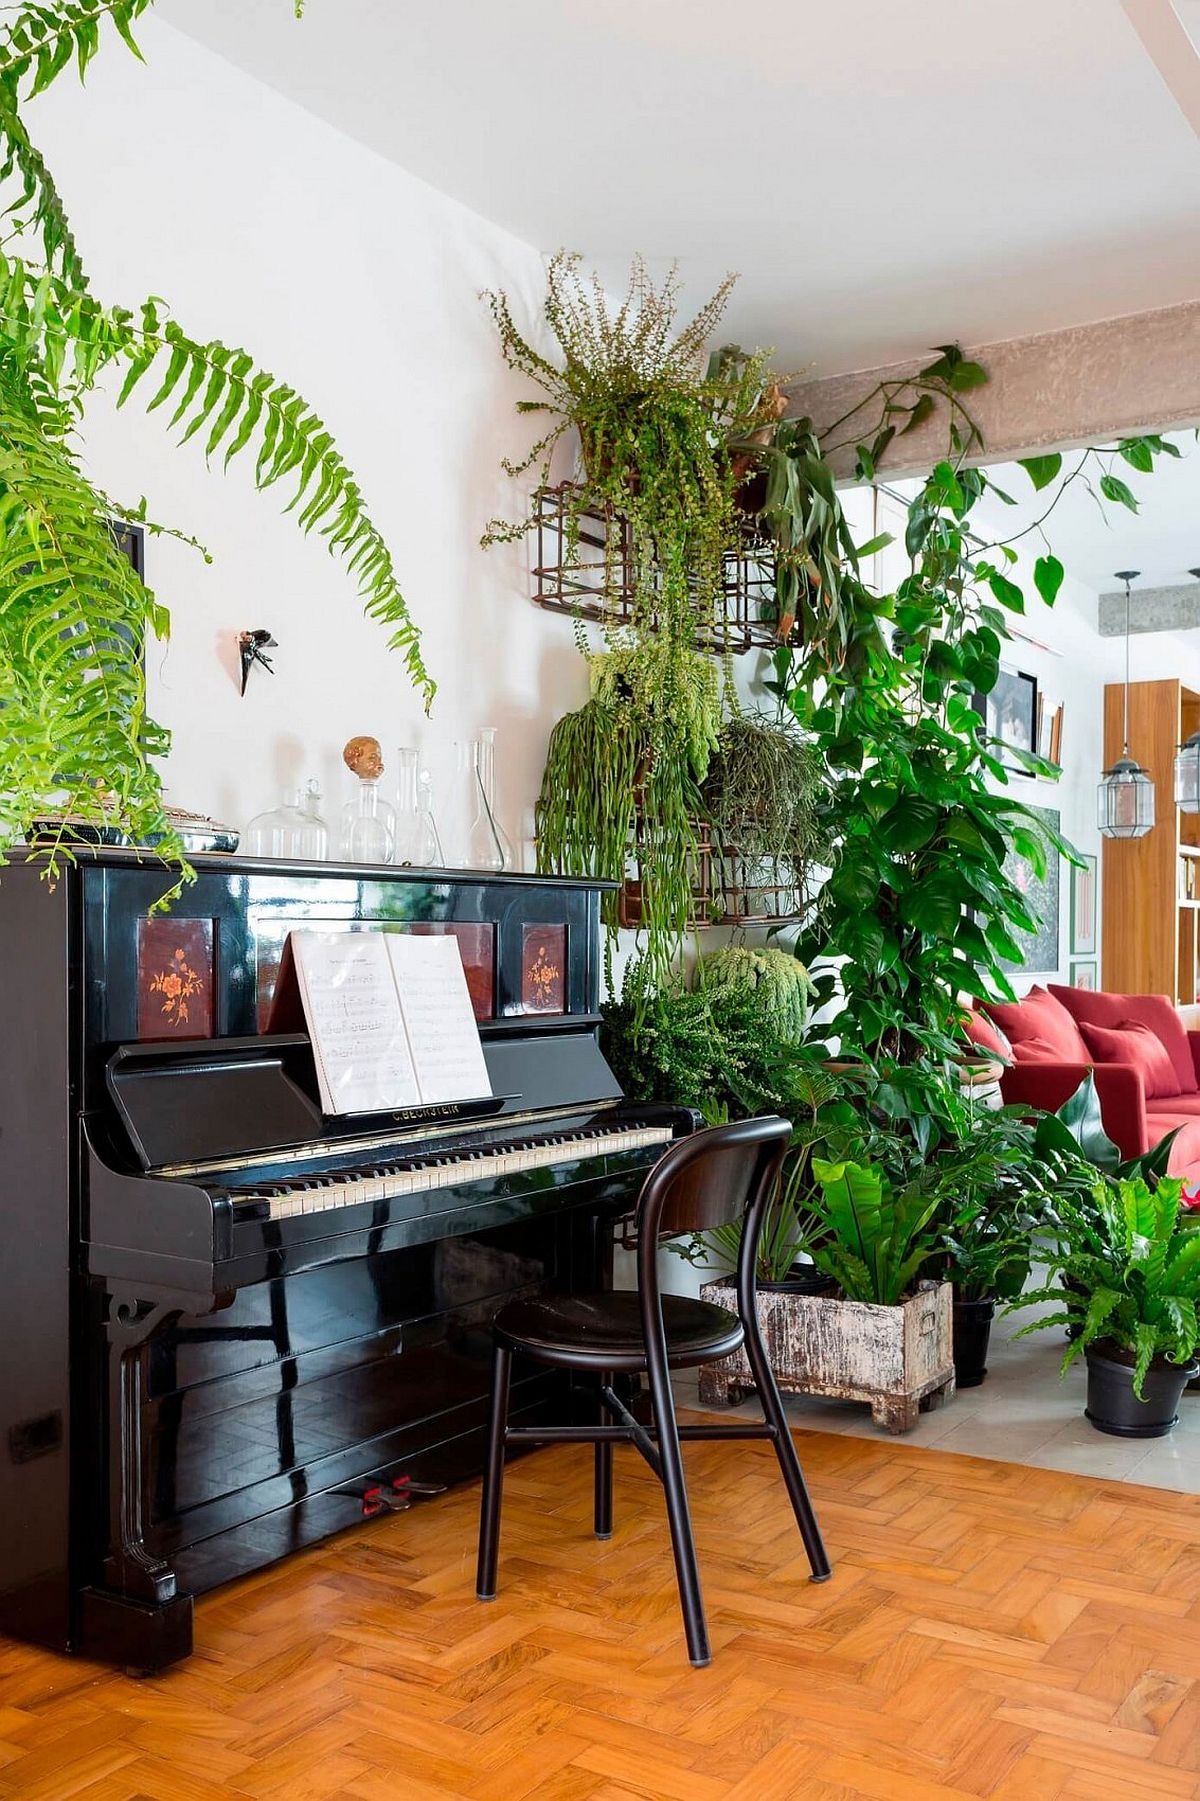 Stunning use of indoors plants creates a refreshing and cheerful ambiance